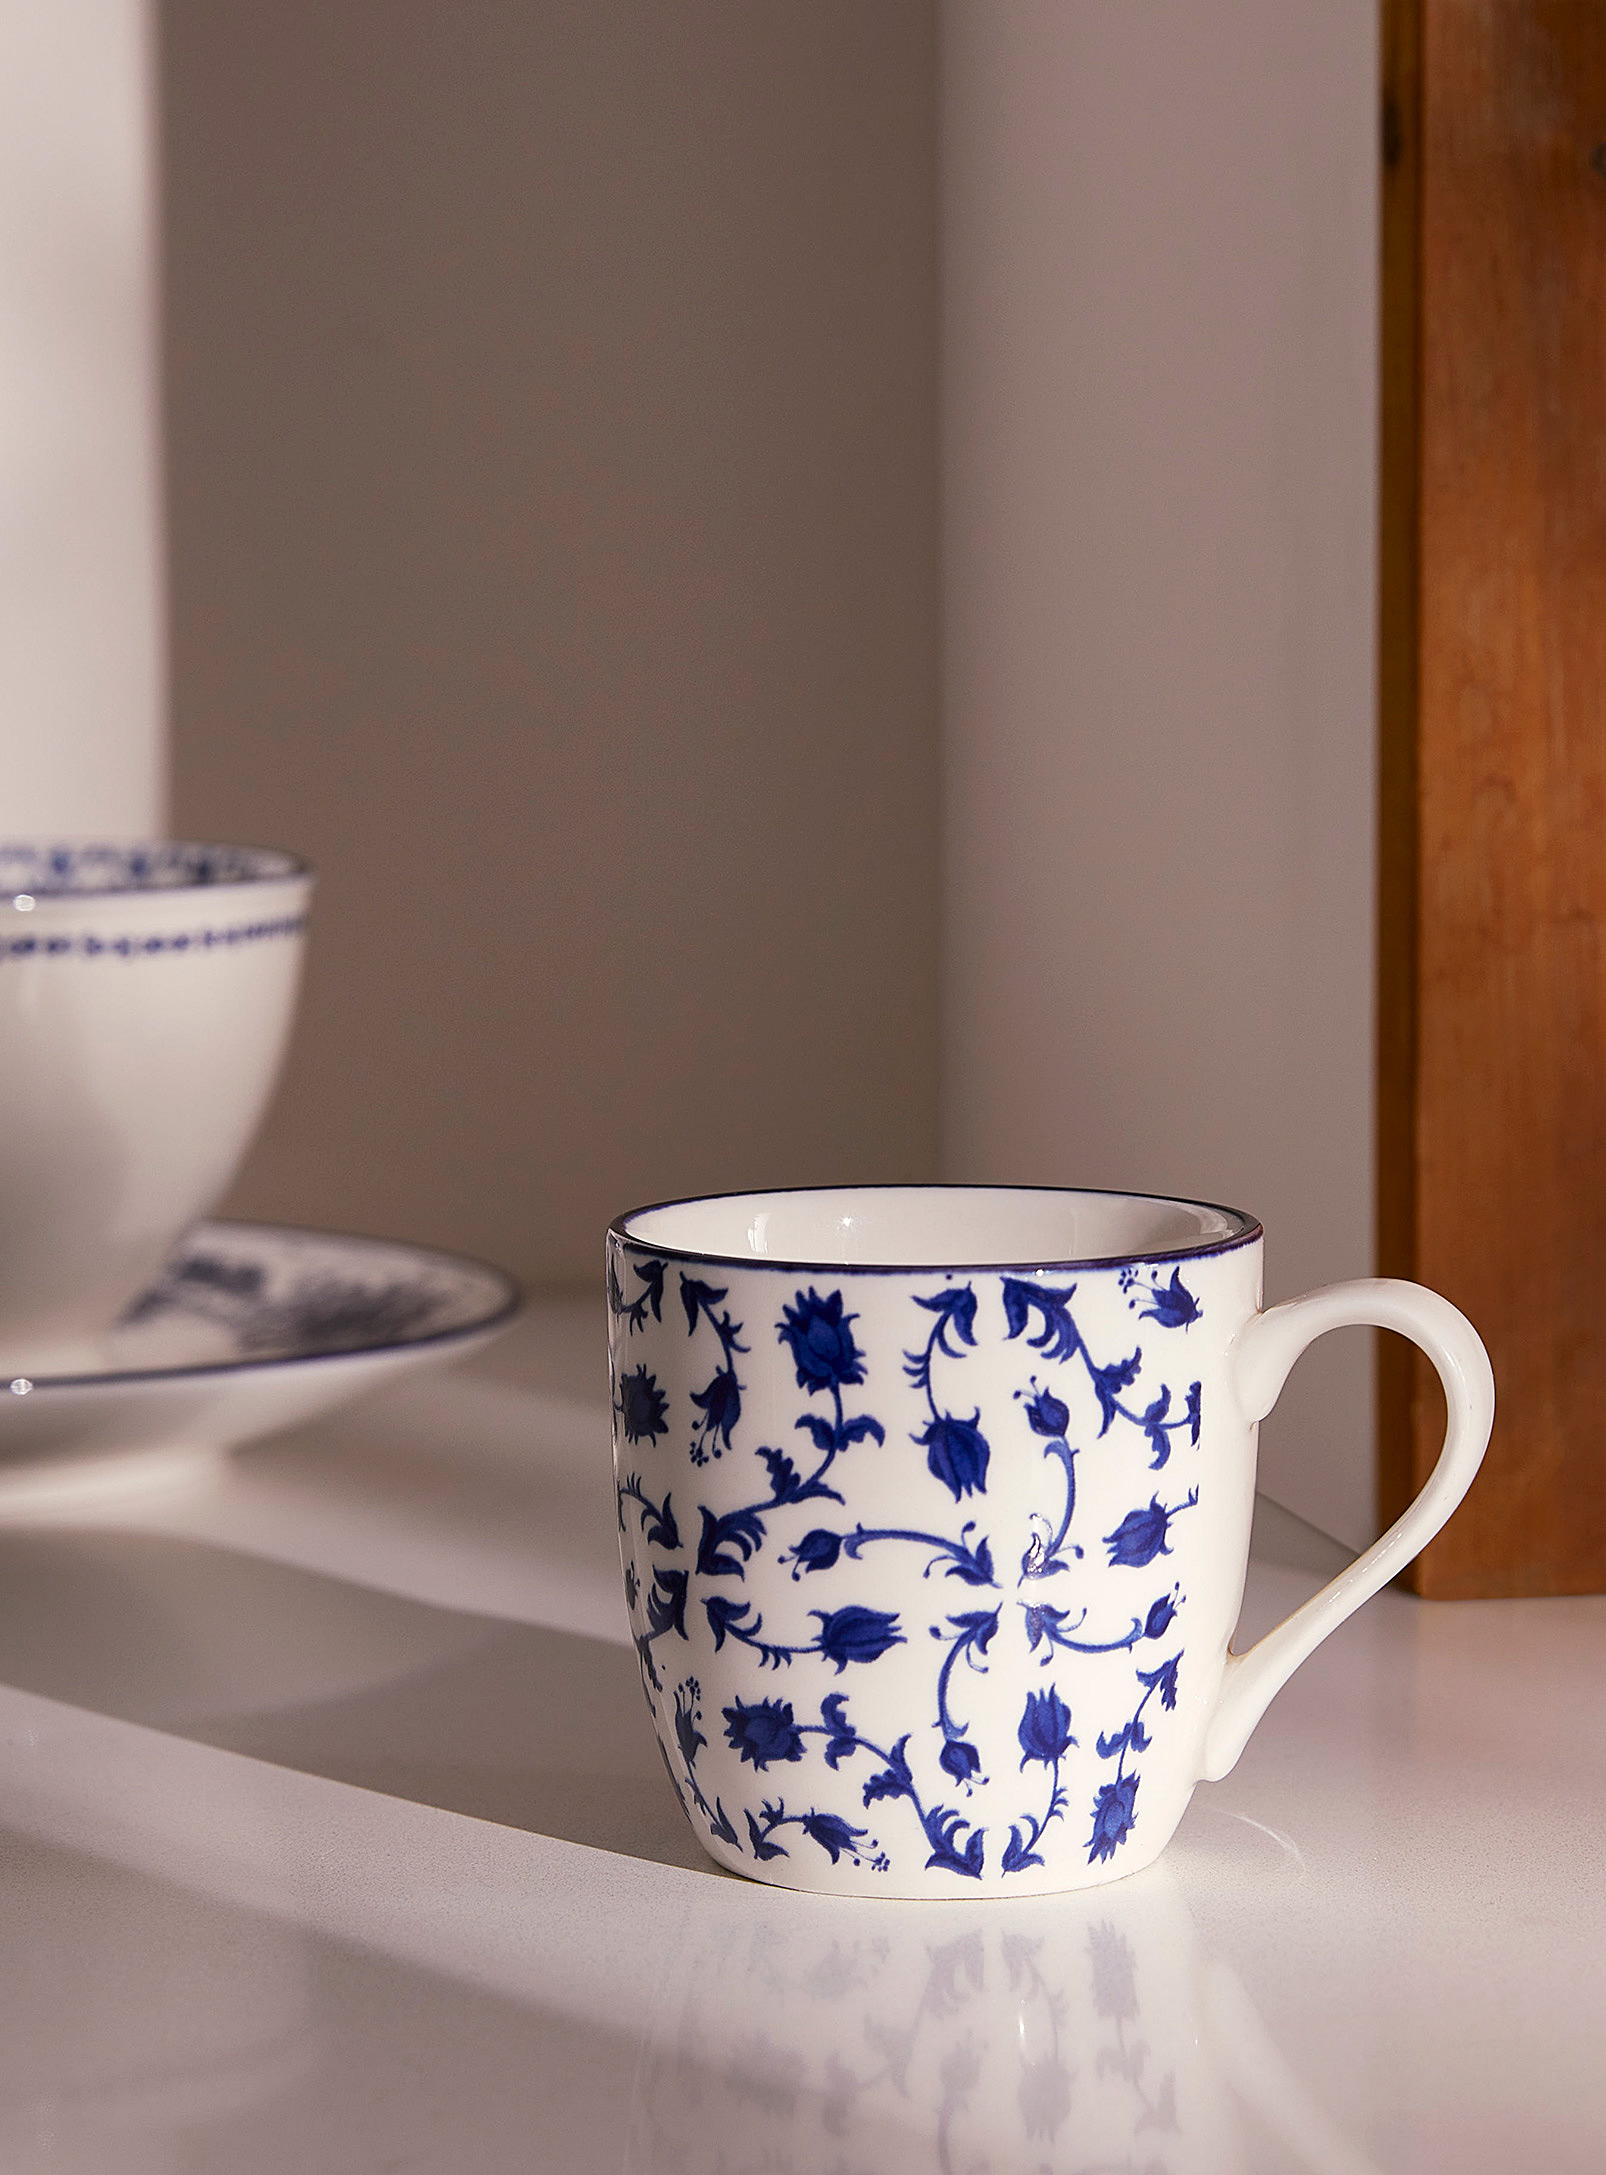 Simons Maison Floral Pattern Ceramic Espresso Cup In Patterned White